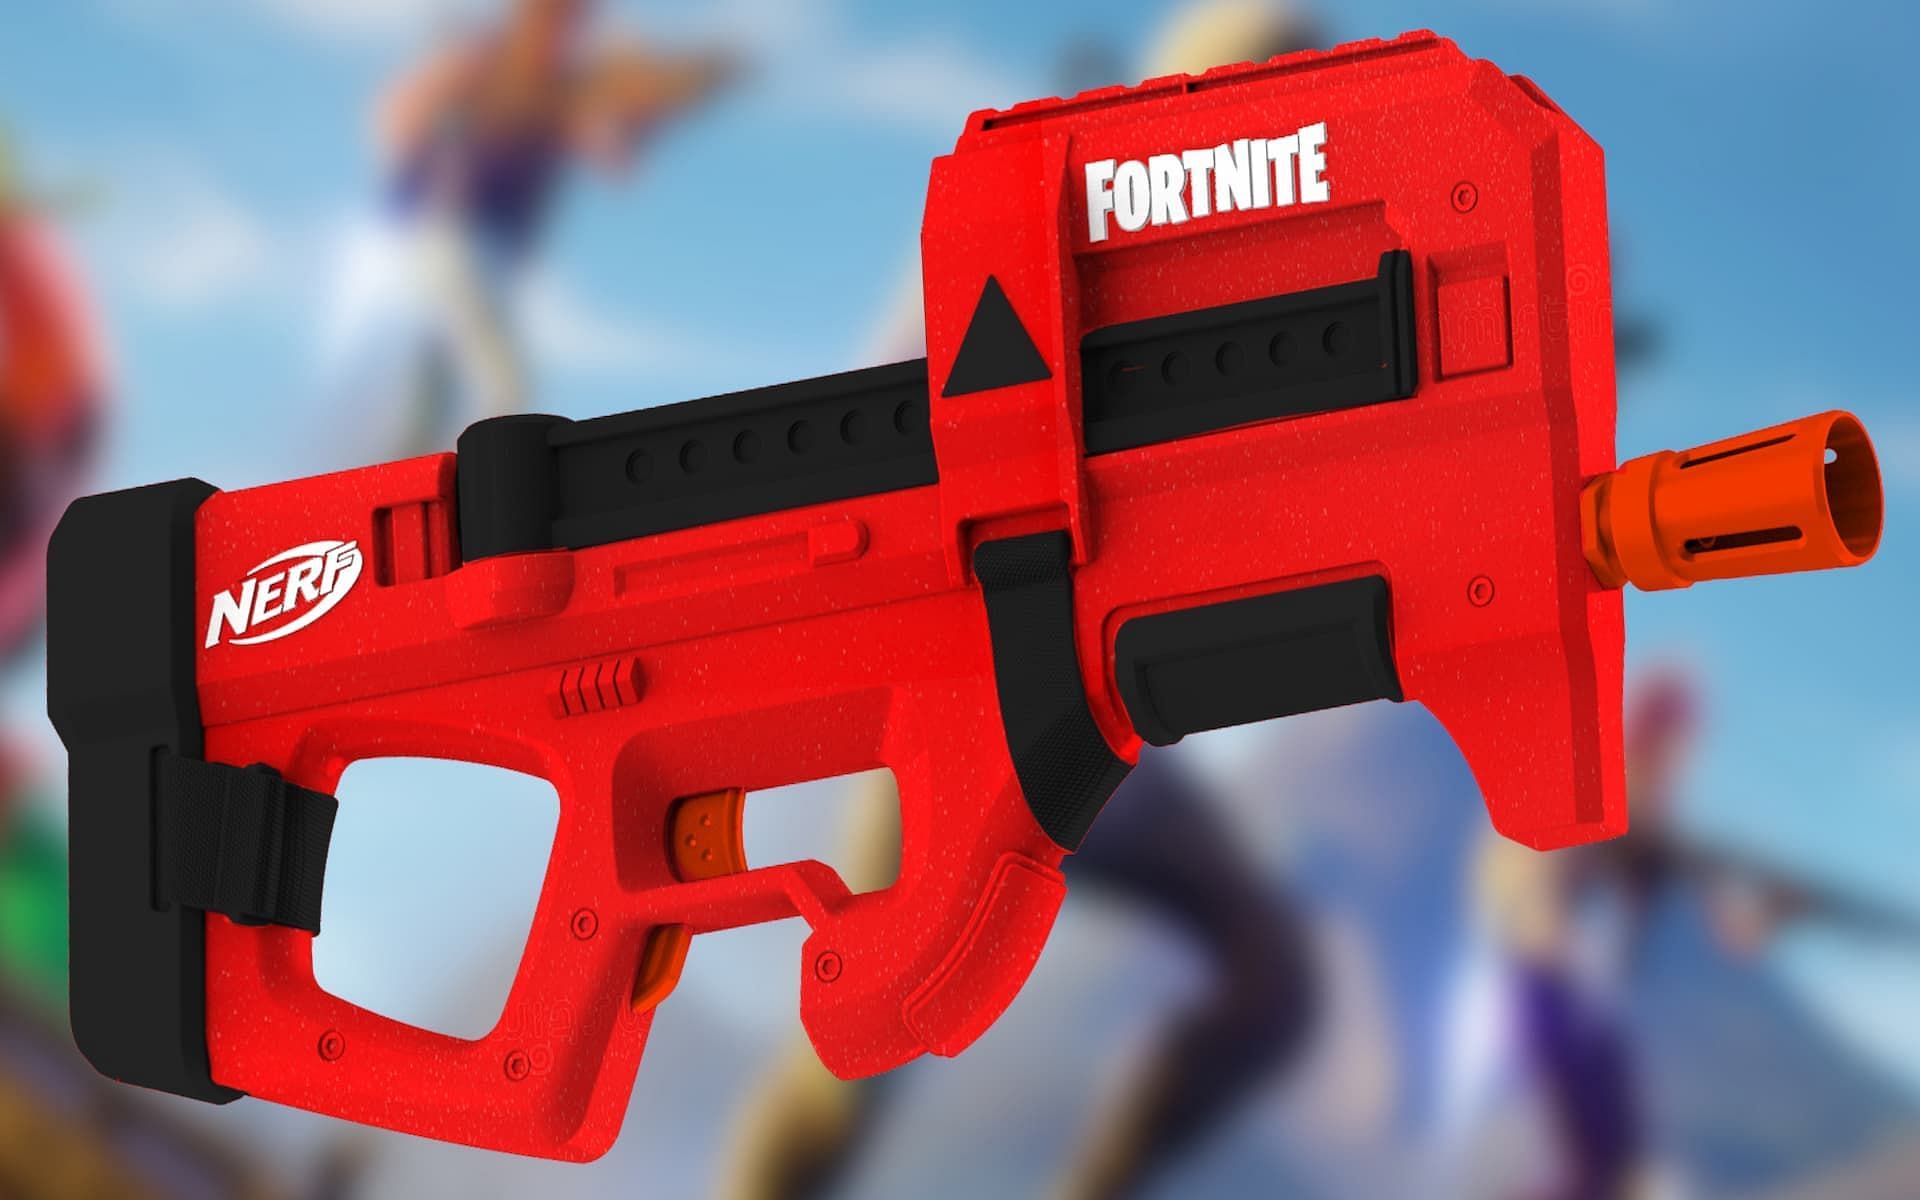 Best Fortnite Nerf guns - get the top discounts and deals